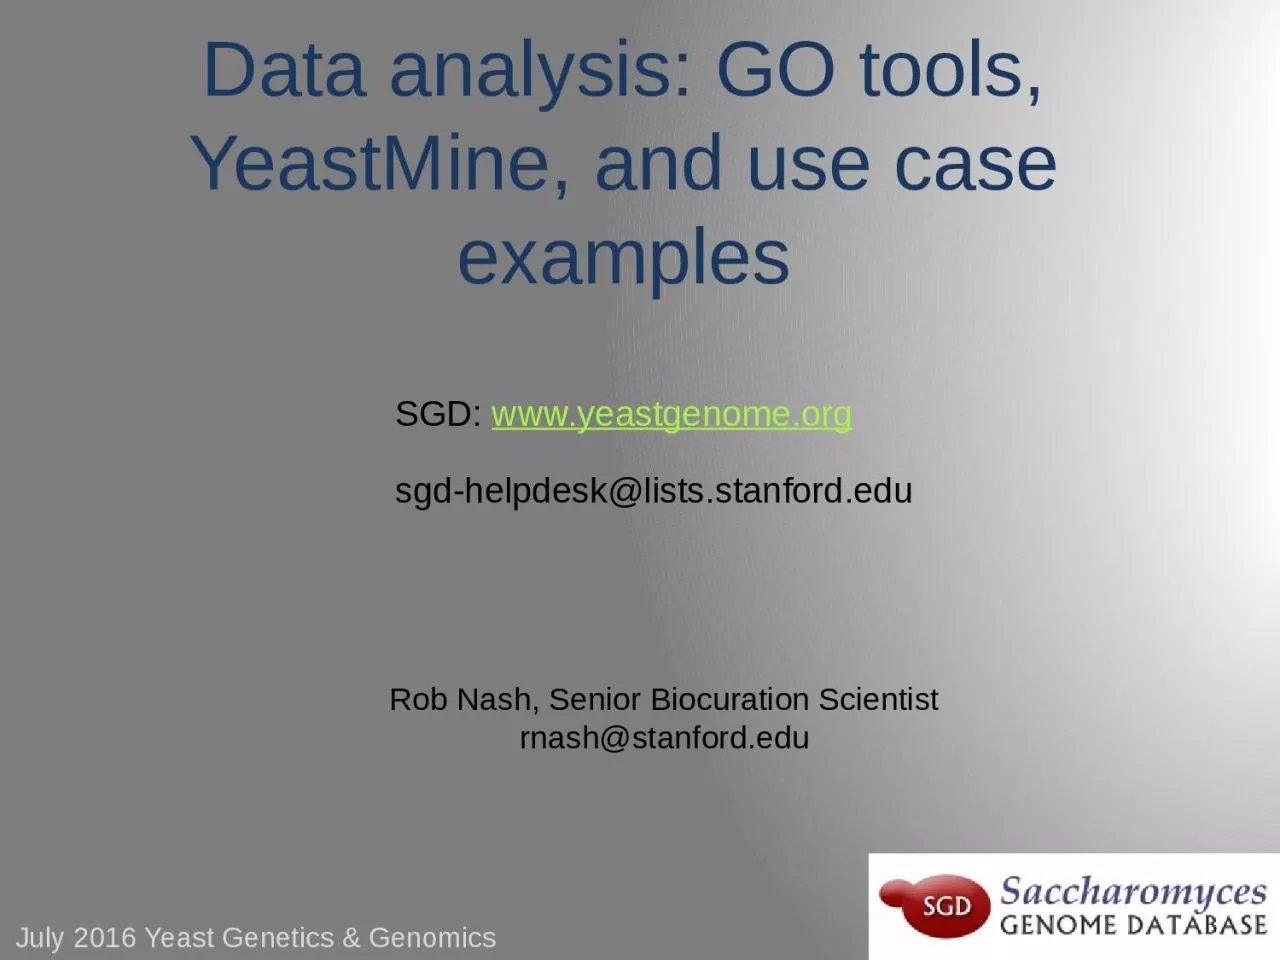 Data analysis: GO tools, YeastMine, and use case examples